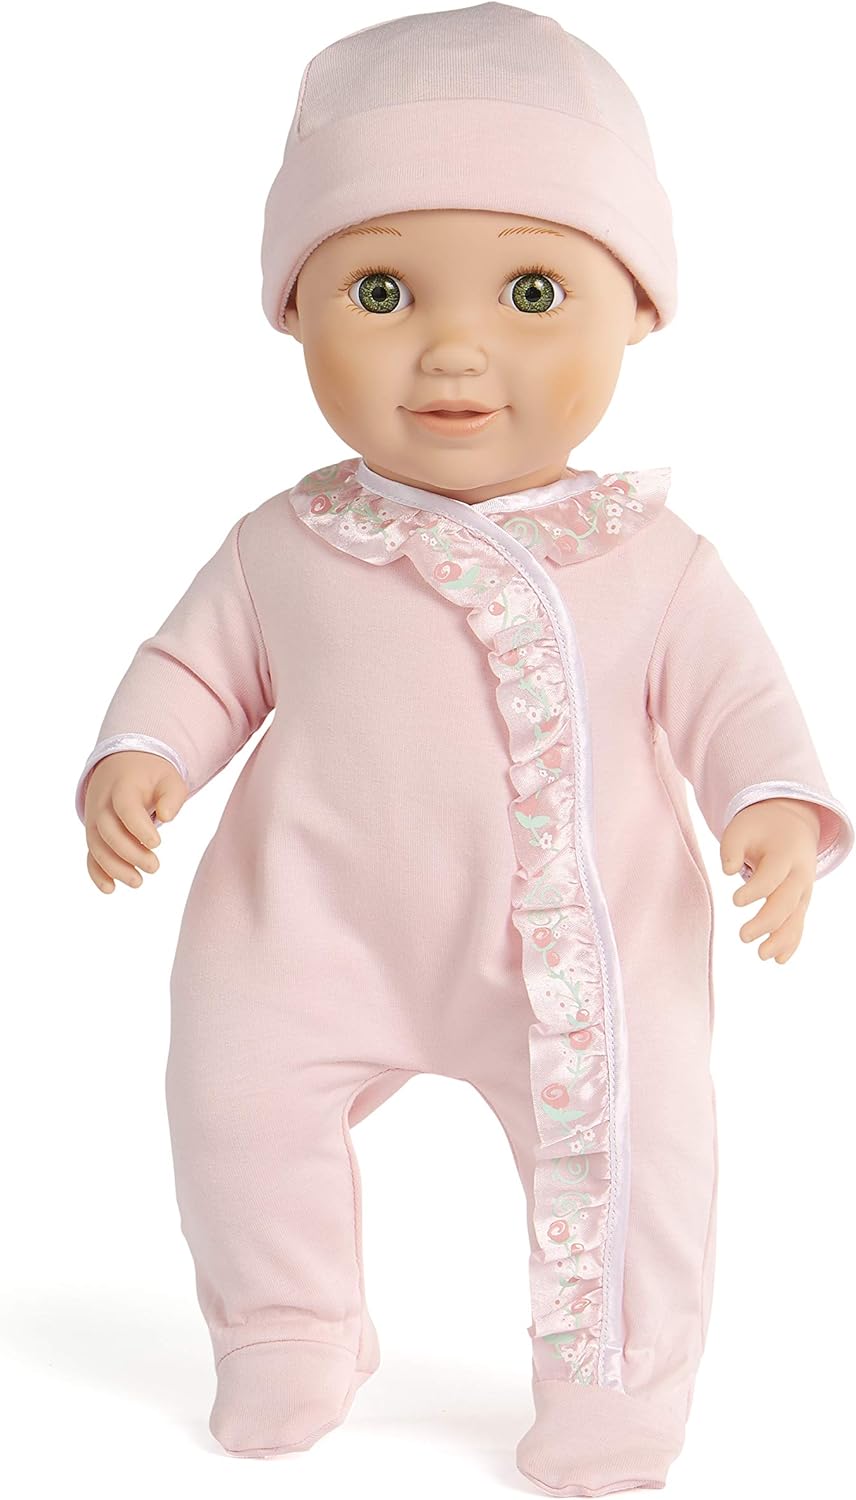 You & Me Baby So Sweet 16-Inch Doll with Clothes, Green Eyes - $15